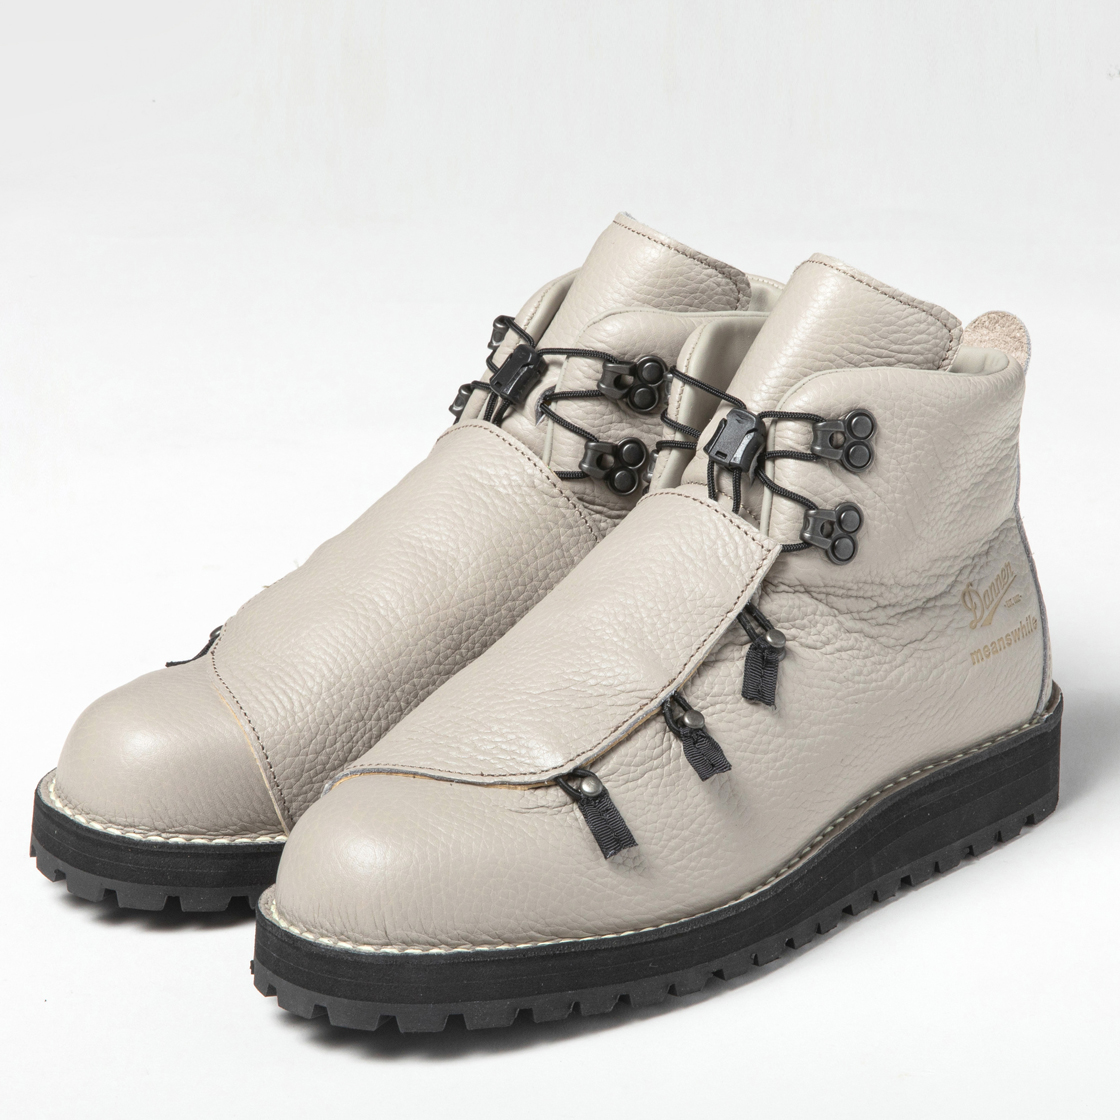 Danner Mountain “Nude” Light Grey | meanswhile